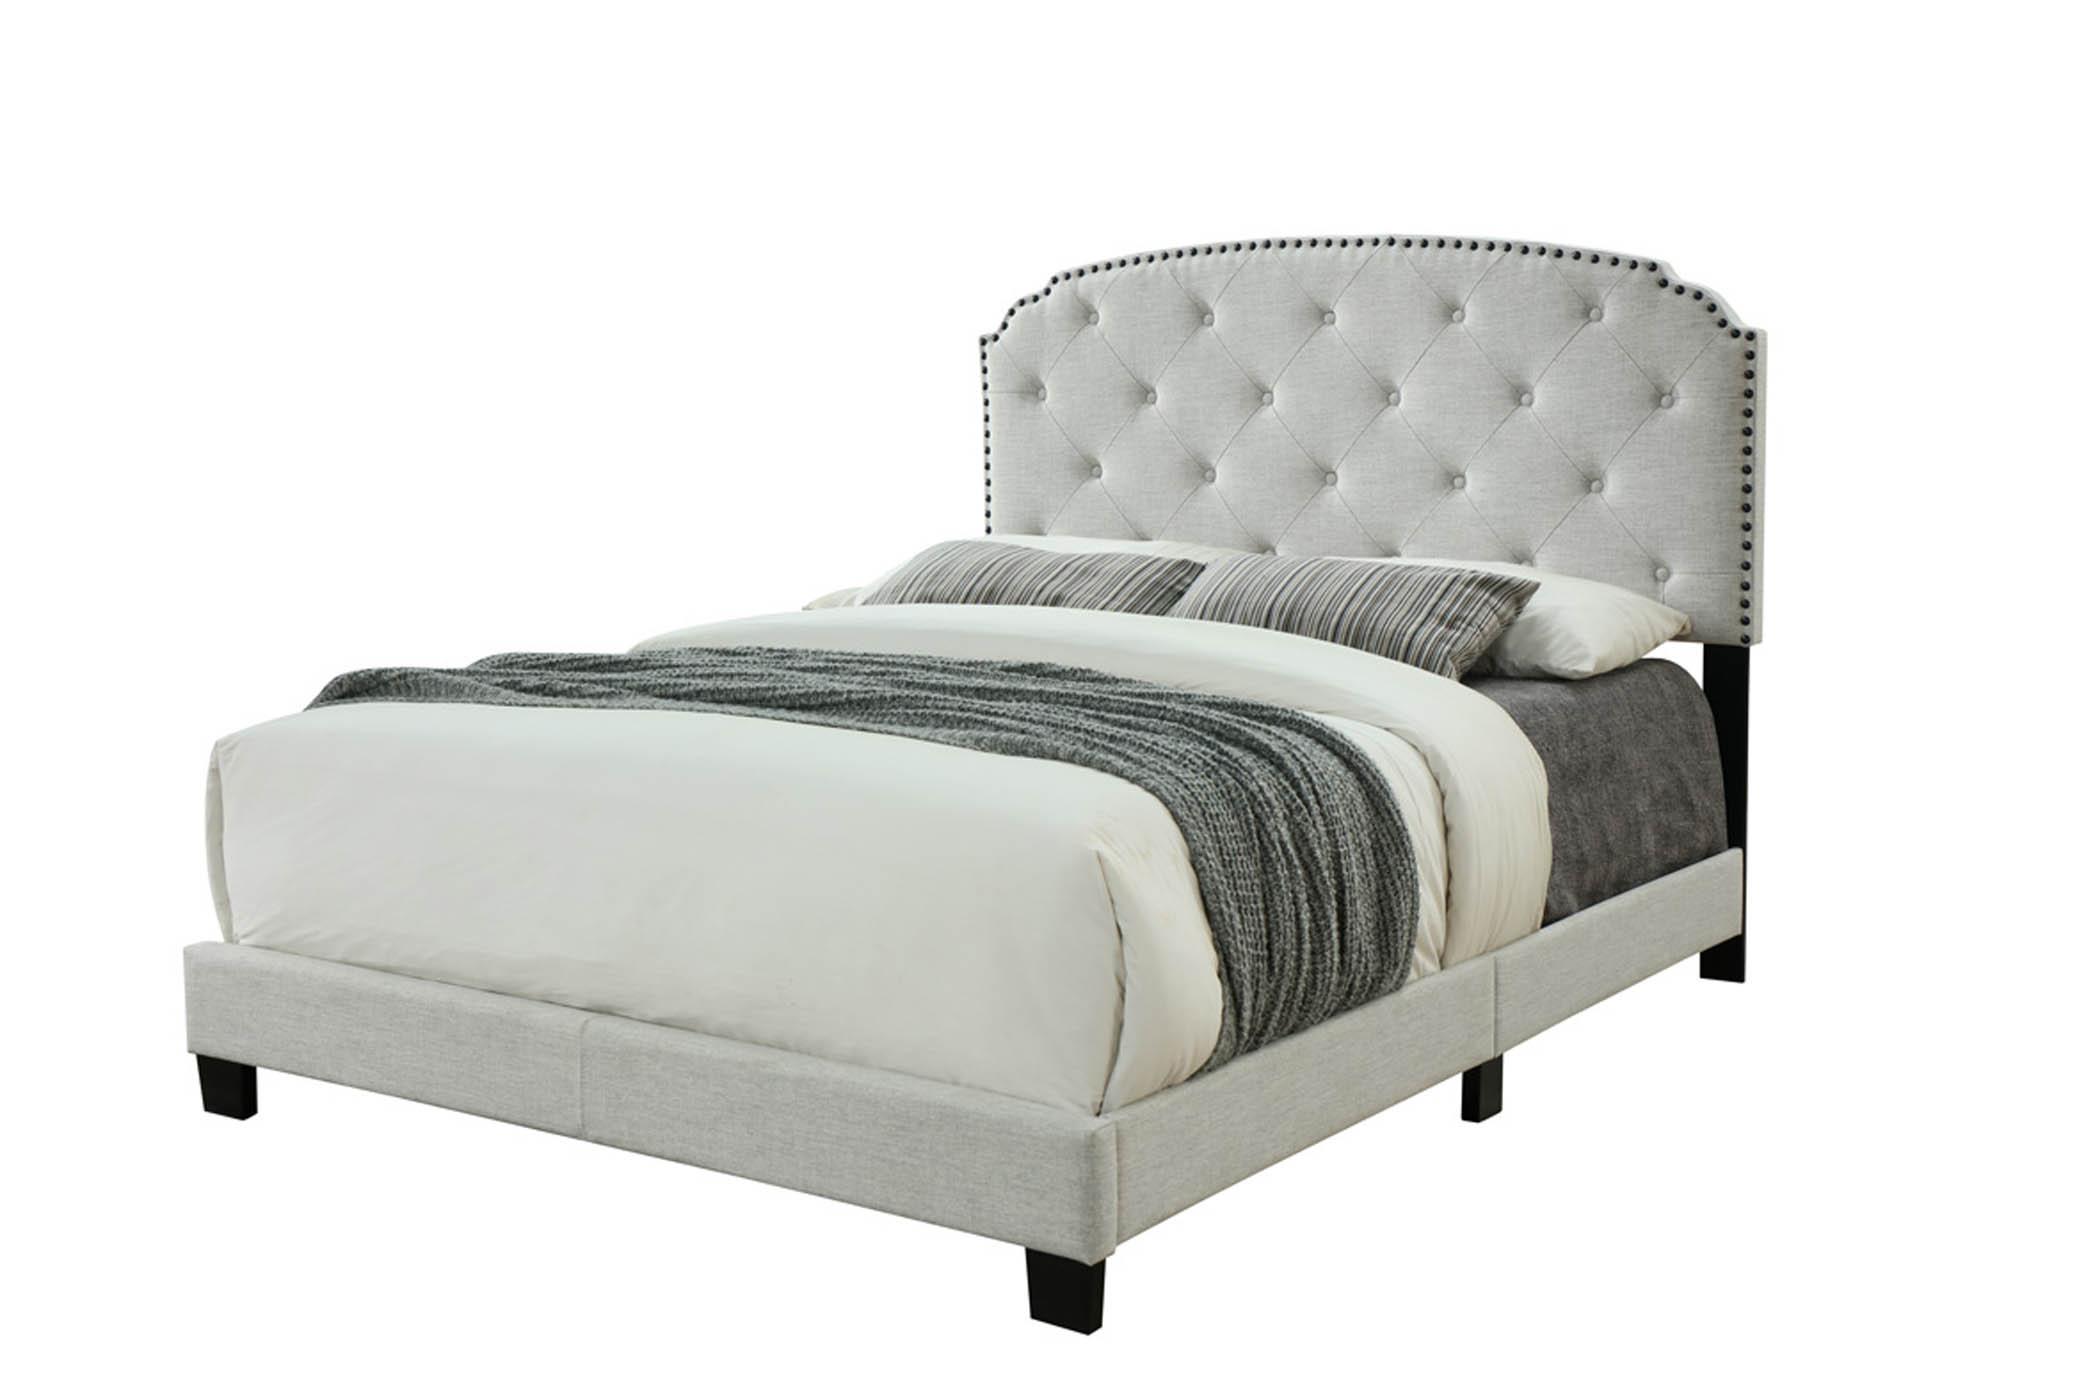 Modern, Transitional Panel Bed OLIVIA 1602DS-110 1602DS-110 in Light Gray Fabric